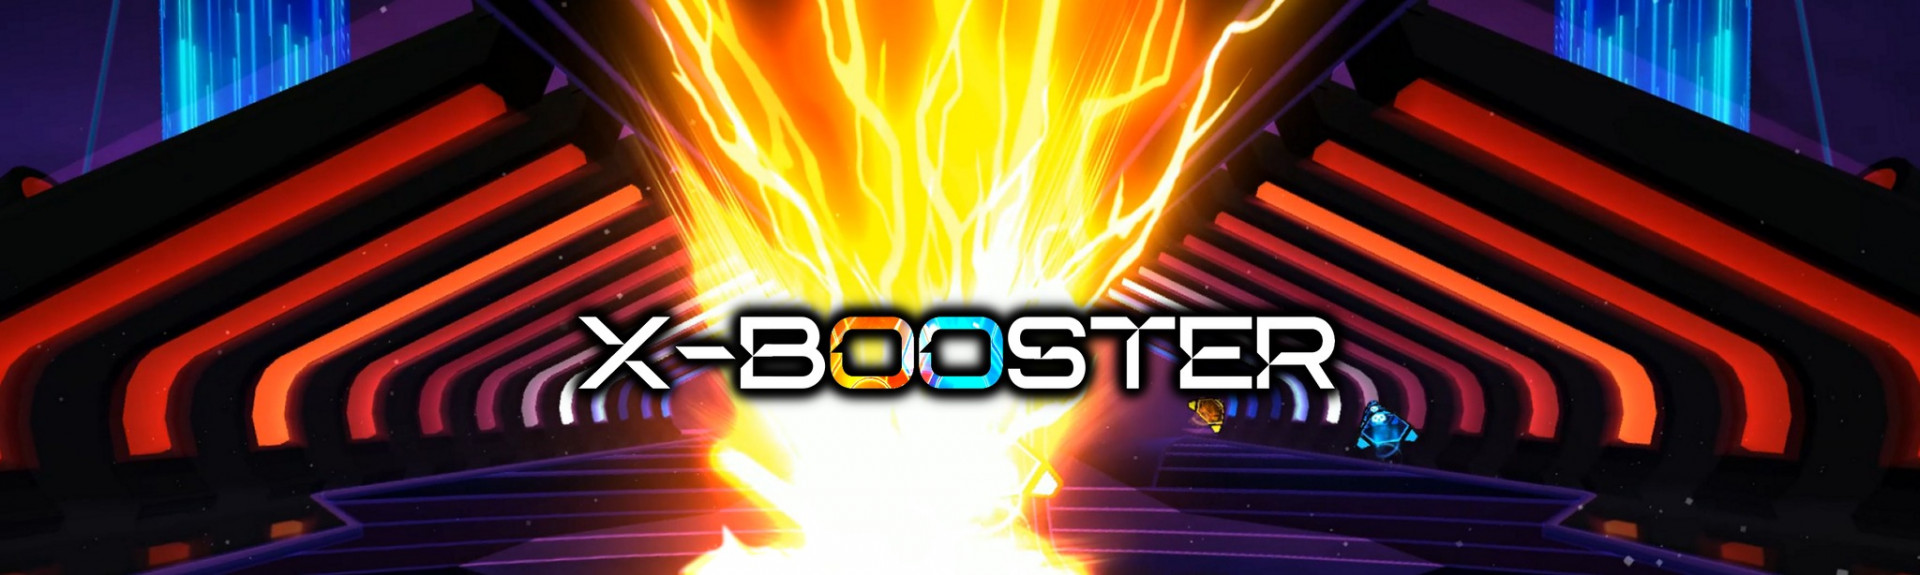 X-BOOSTER